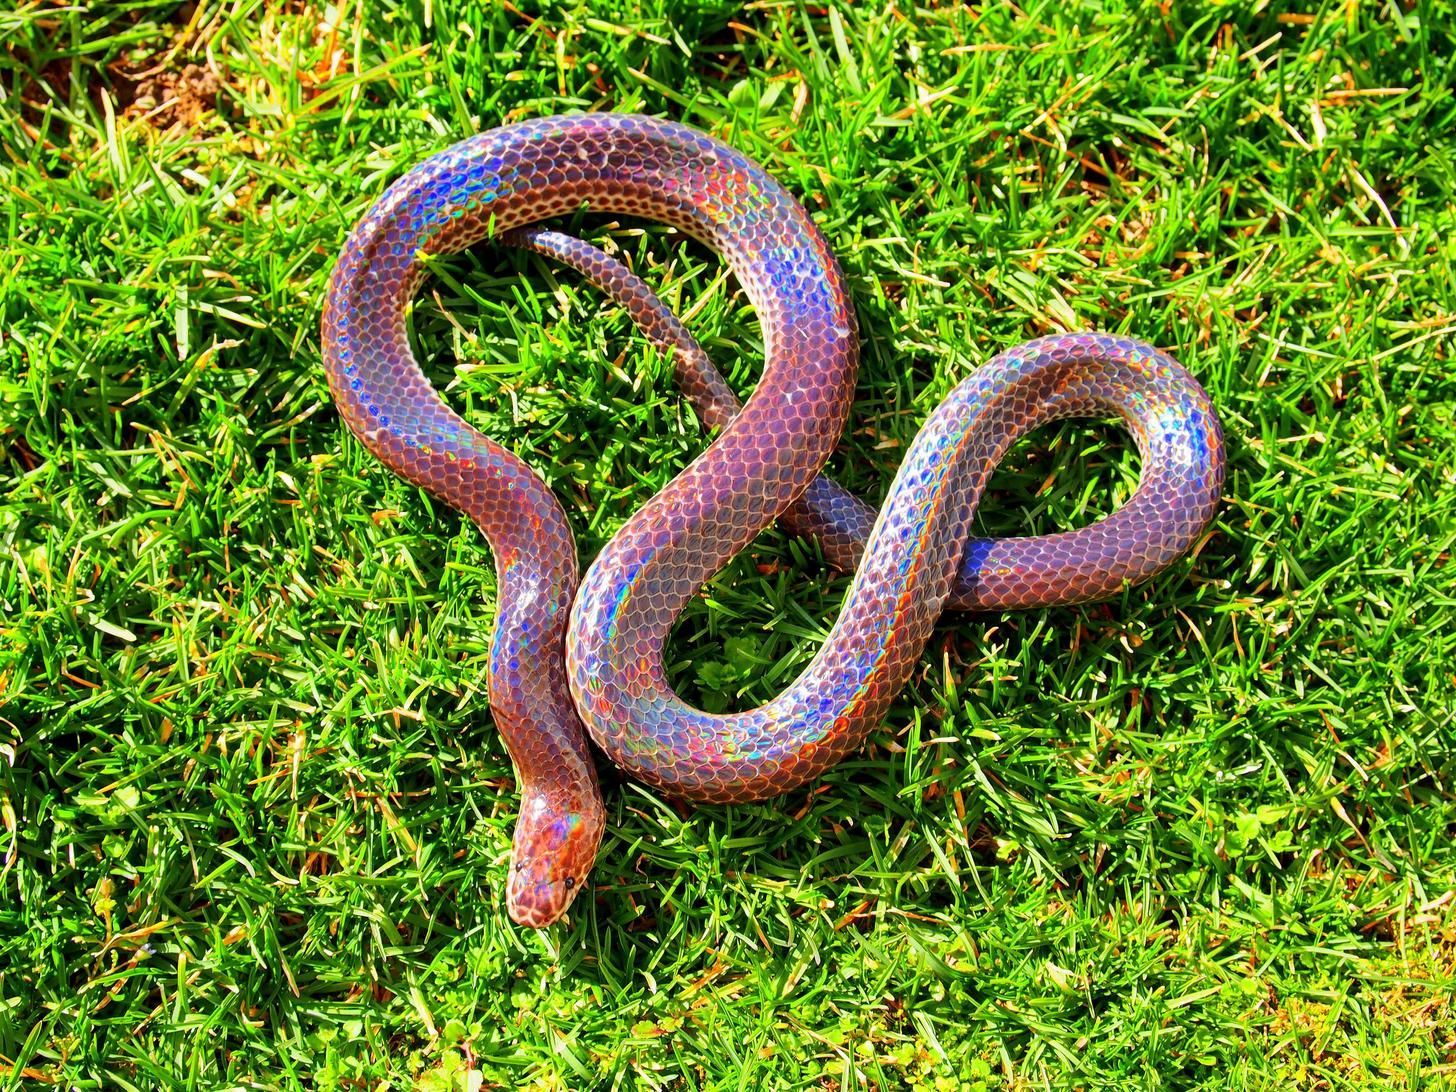 Sunbeam Snake #nature #Photography #Makeup #Quotes #Light #Art #Aesthetic #Forest #Beauty #Crafts #Animals #Pictu. Pretty snakes, Colorful snakes, Snake wallpaper